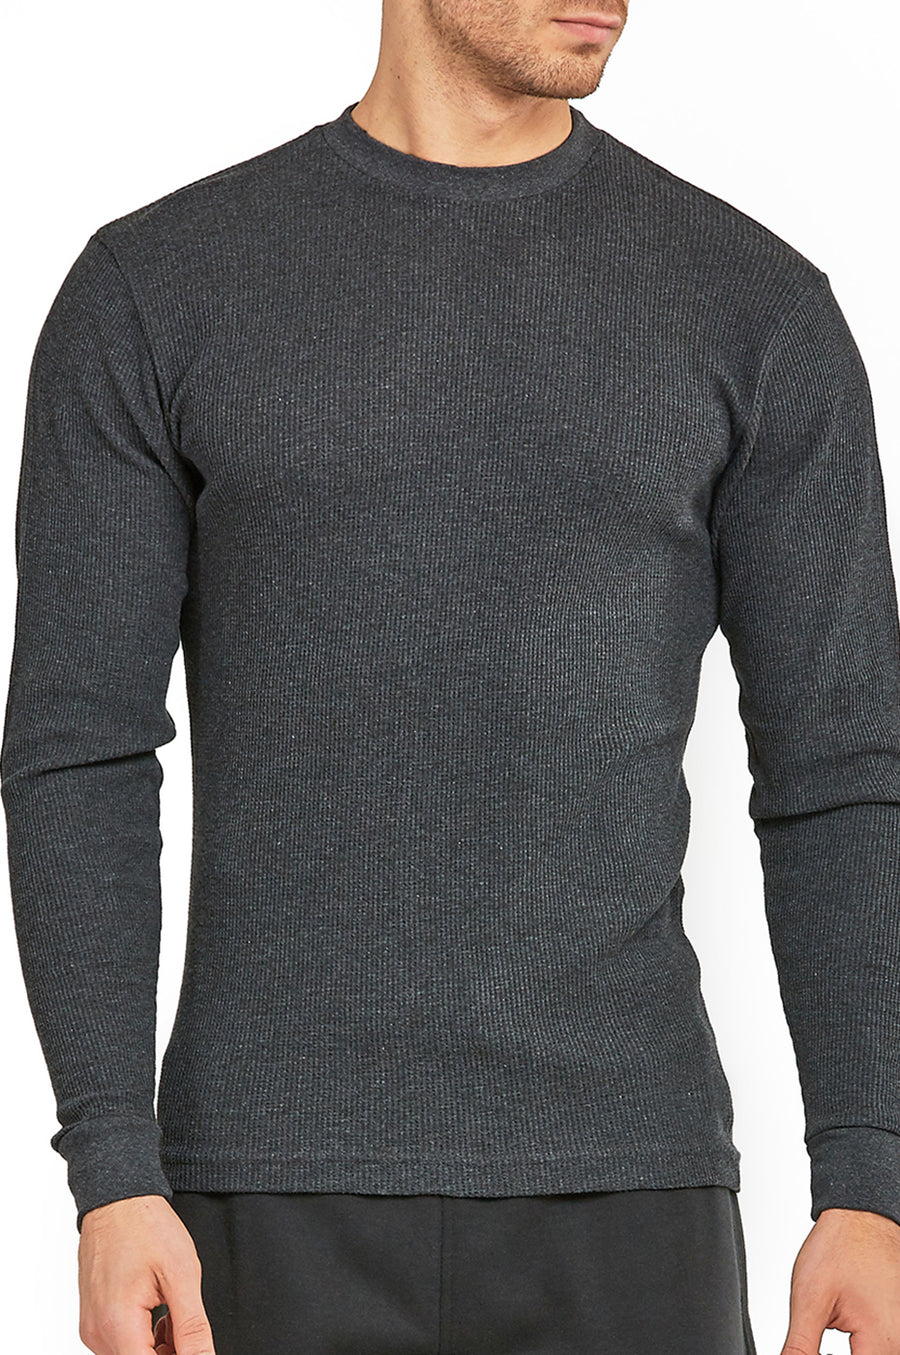 Men's Classic Waffle Knit Heavyweight Cotton Long Sleeve Thermal T